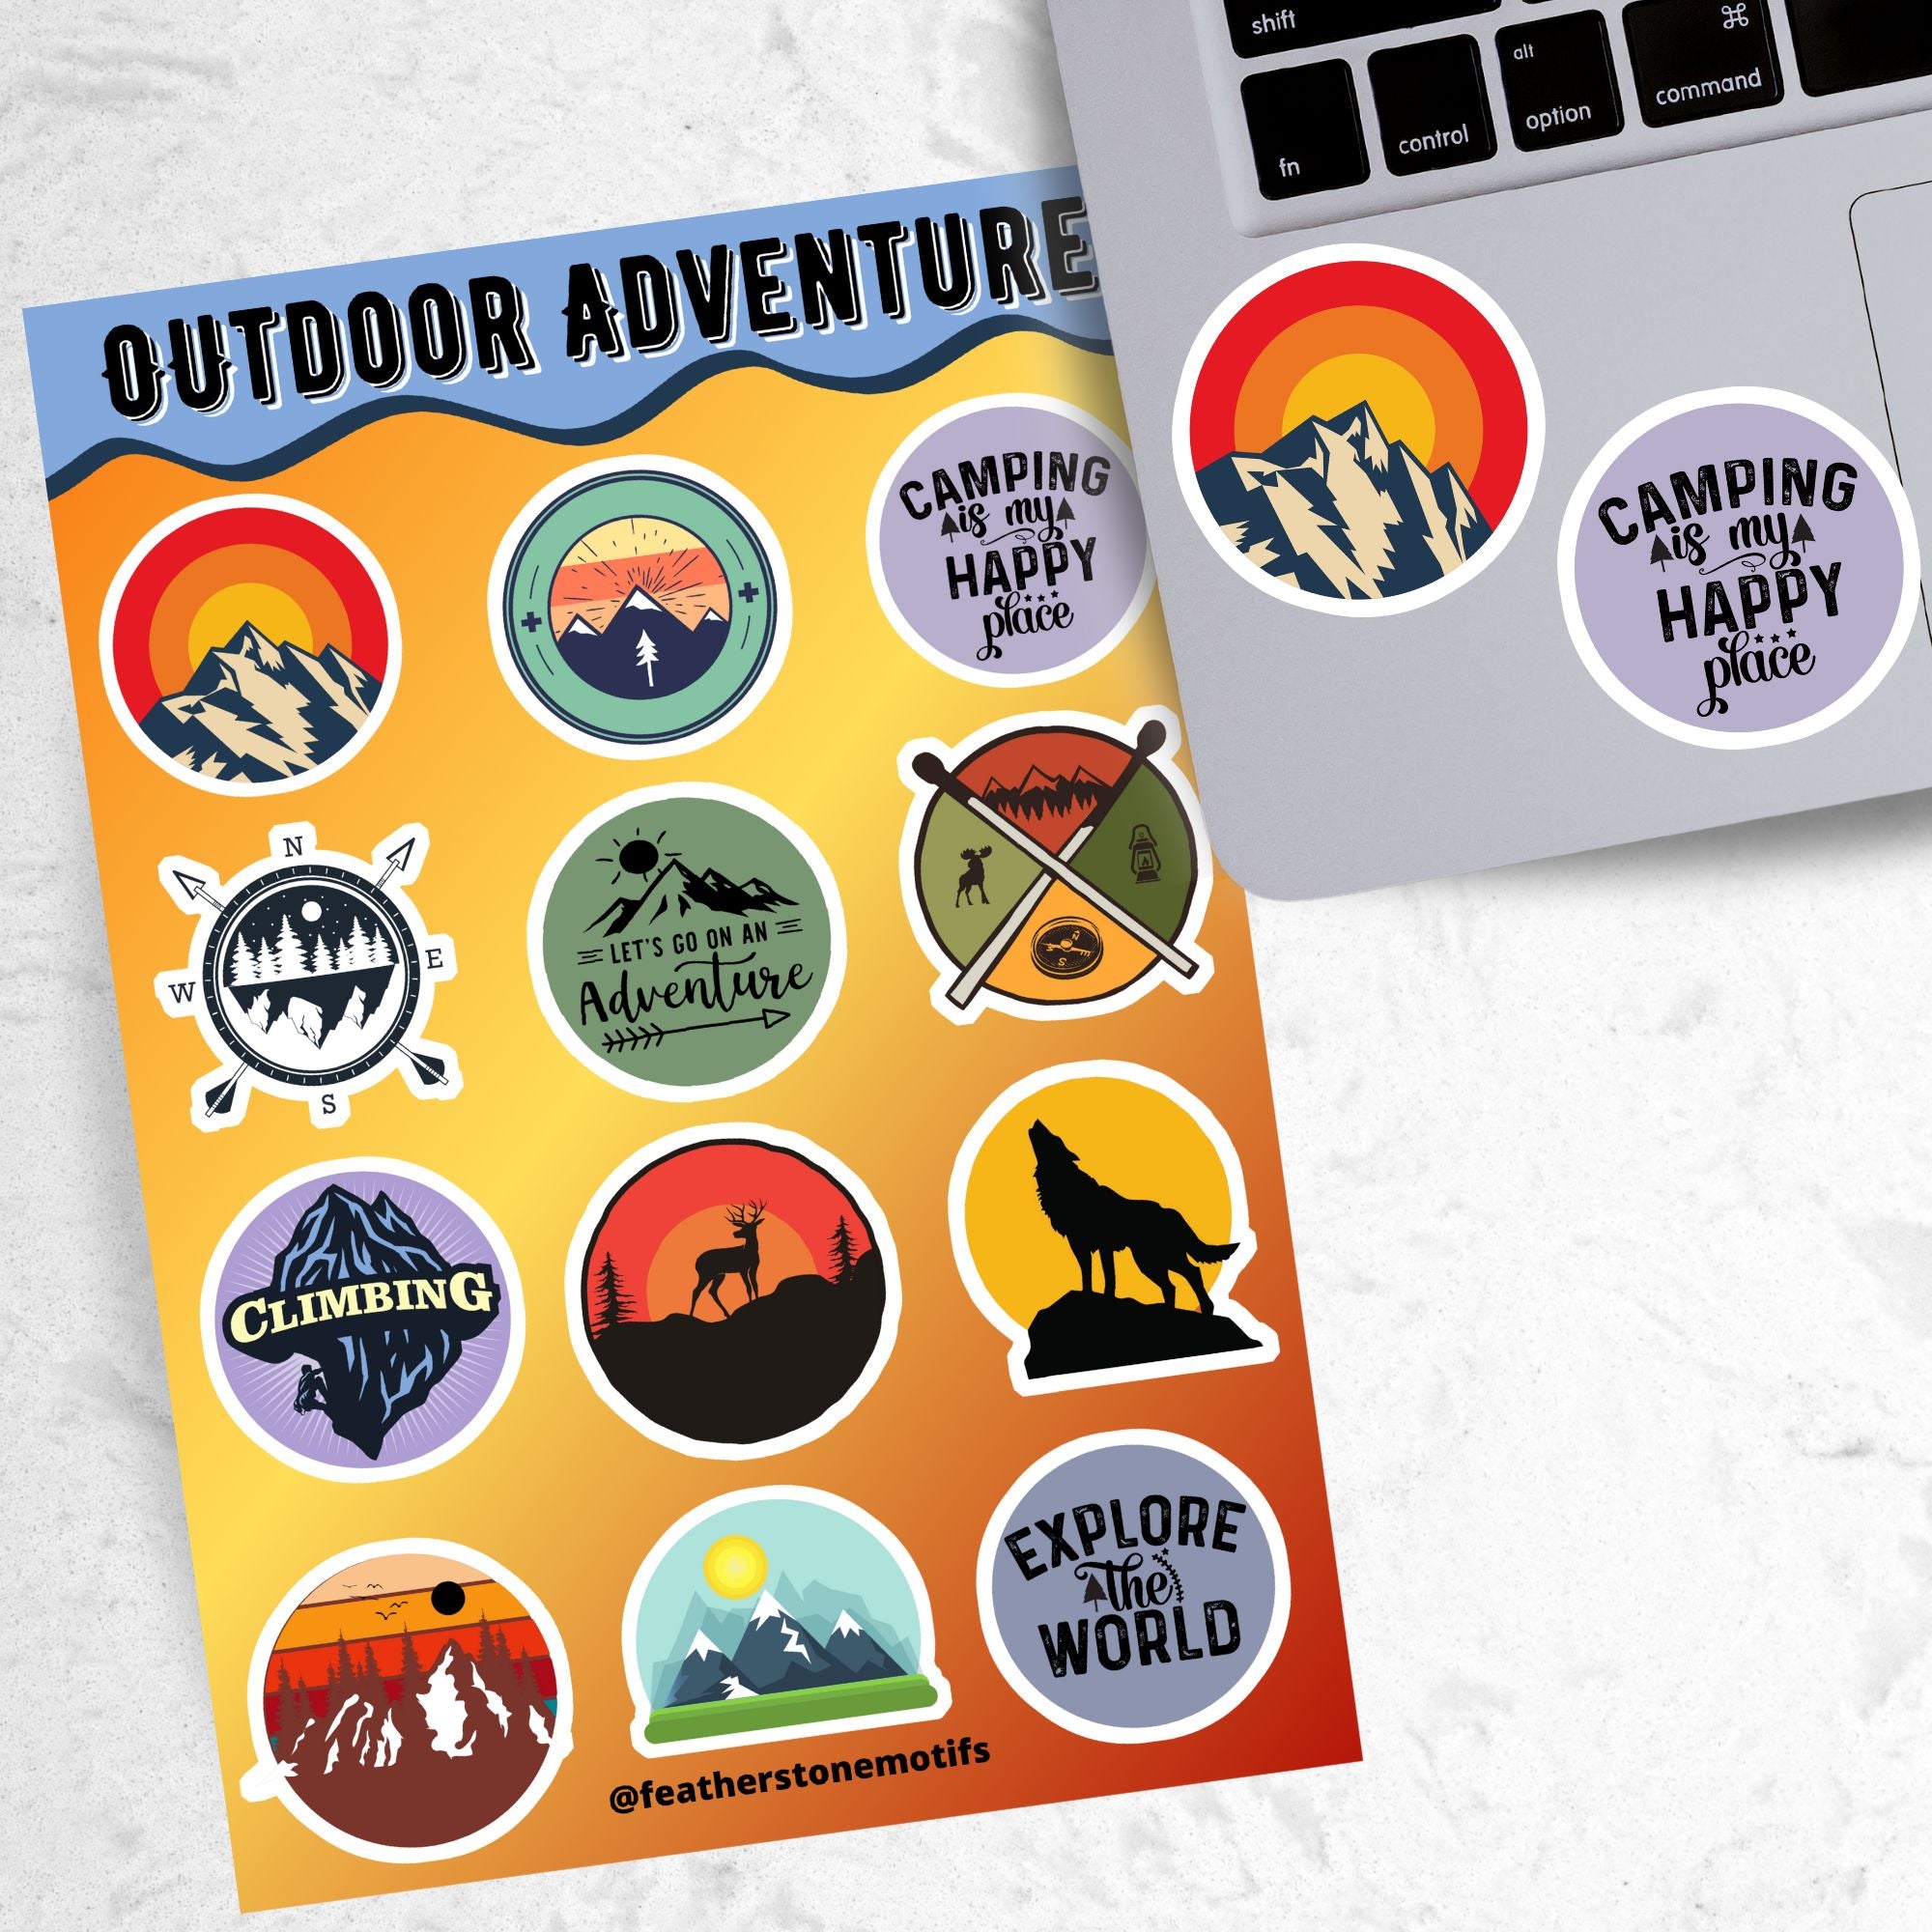 Tie up your boots and enter the wild with this sticker sheet! This sticker sheet has twelve different stickers showing different outdoor activities. From the mountains to camping to climbing this set is perfect for any outdoors person. This image shows the sticker sheet next to an open laptop with stickers of a mountain and one that says "Camping is my happy place"